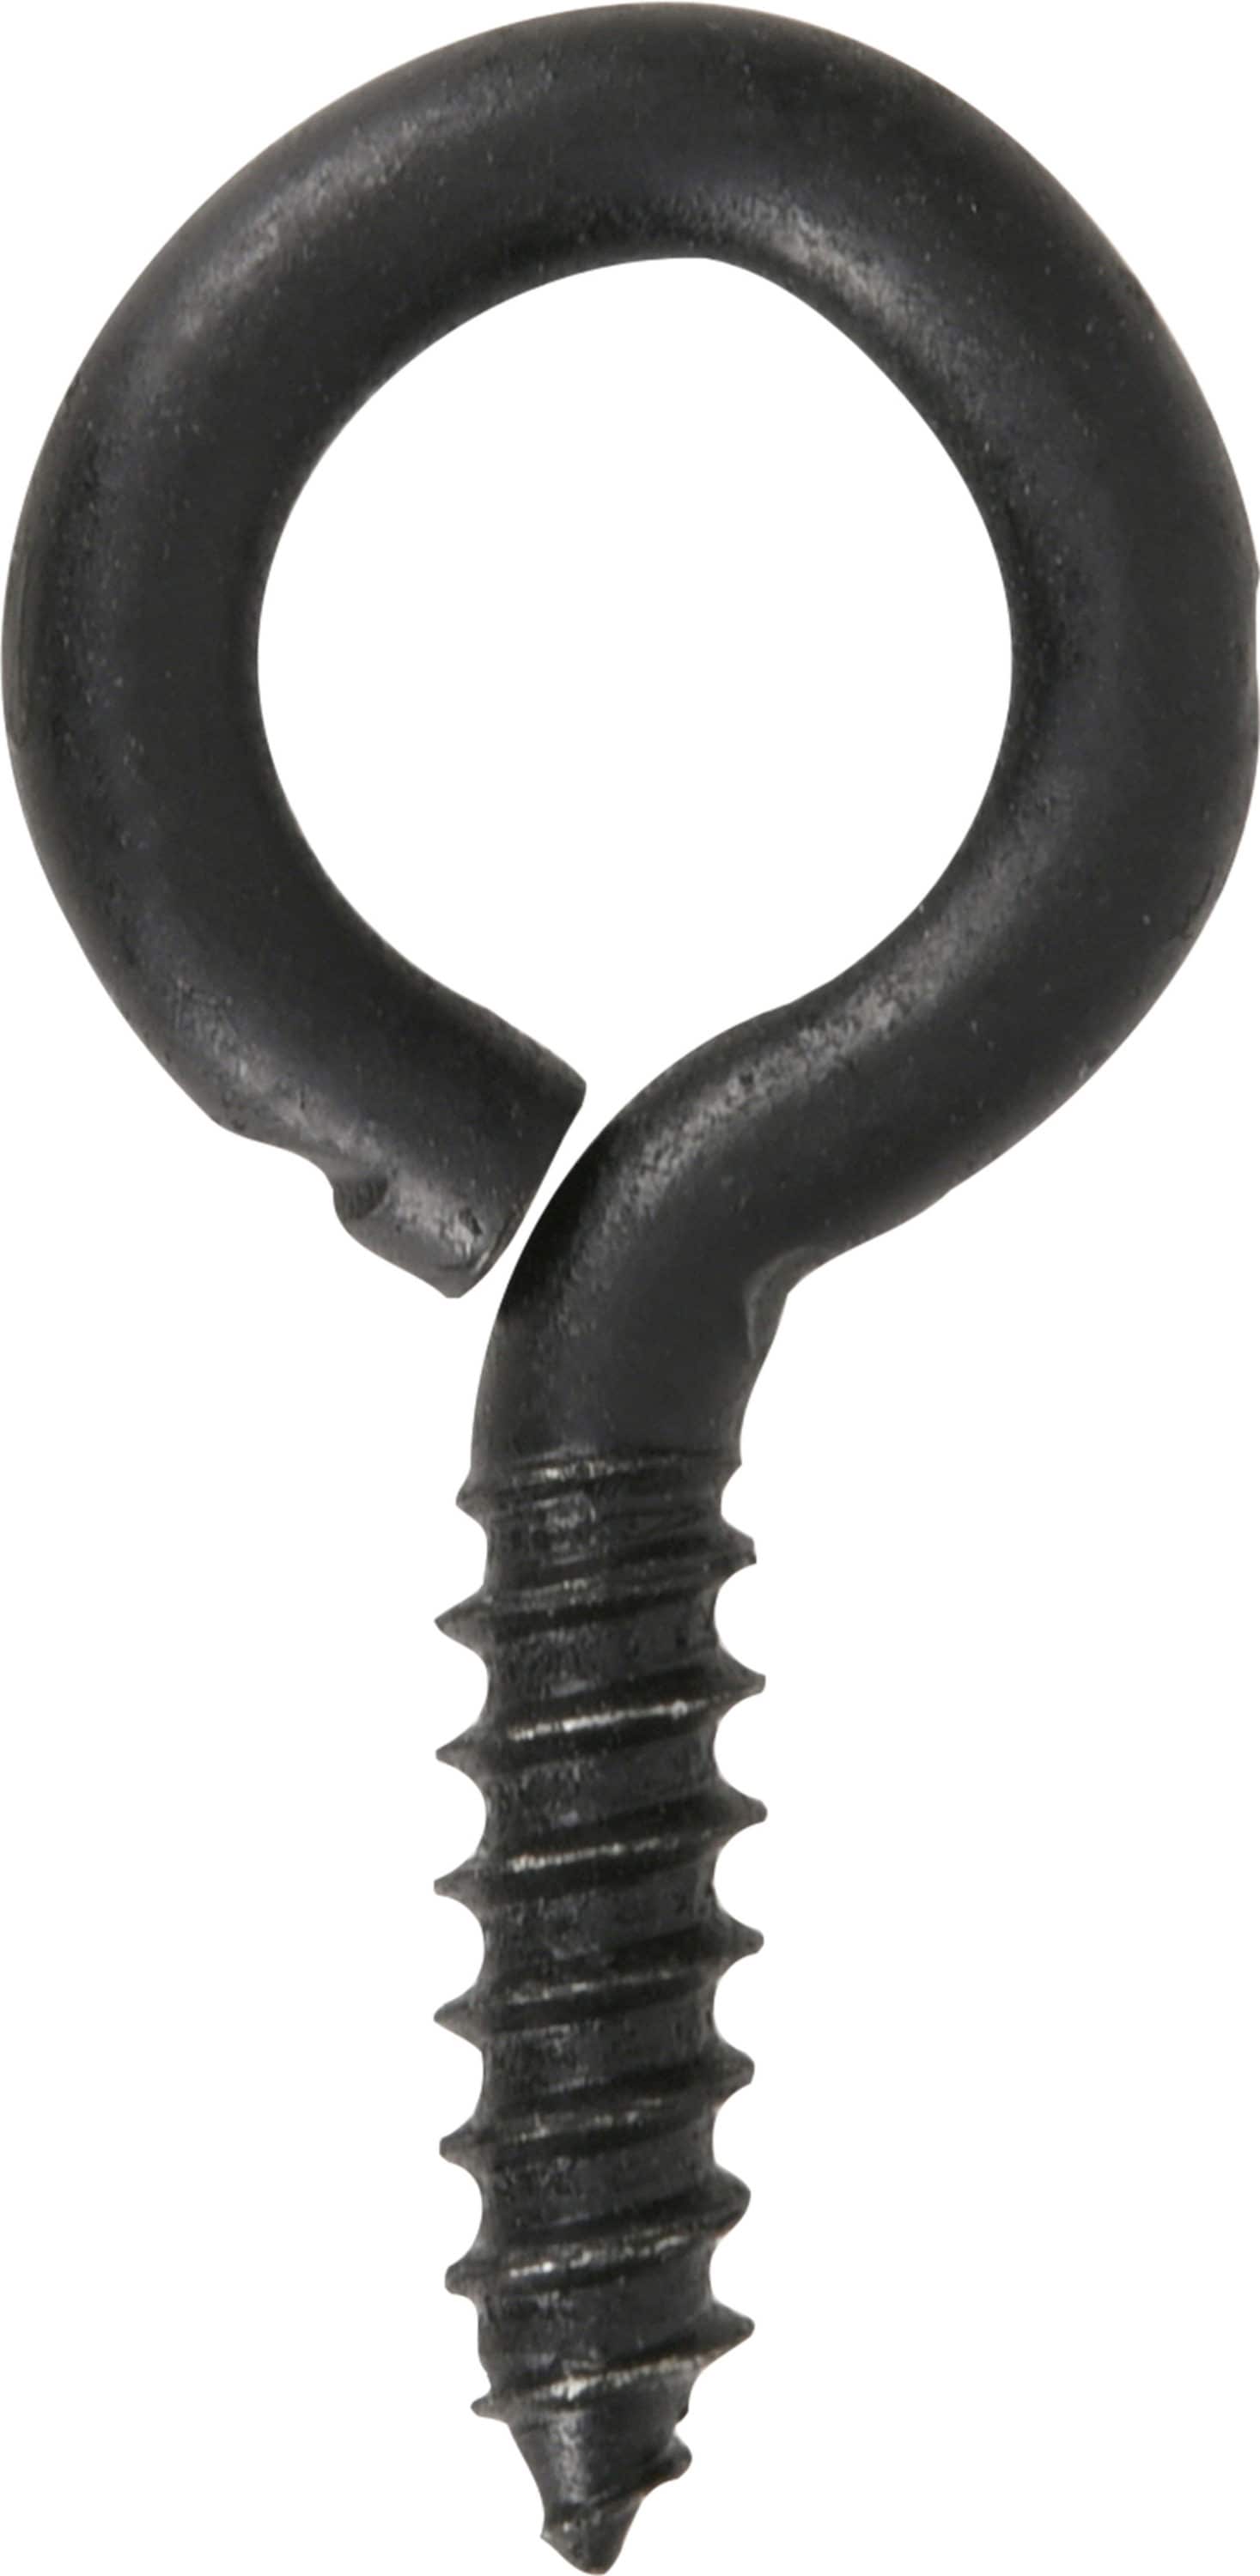 FSN-01-Metal Hook and Eye, Black or Silver - 2 Sizes - Sold in